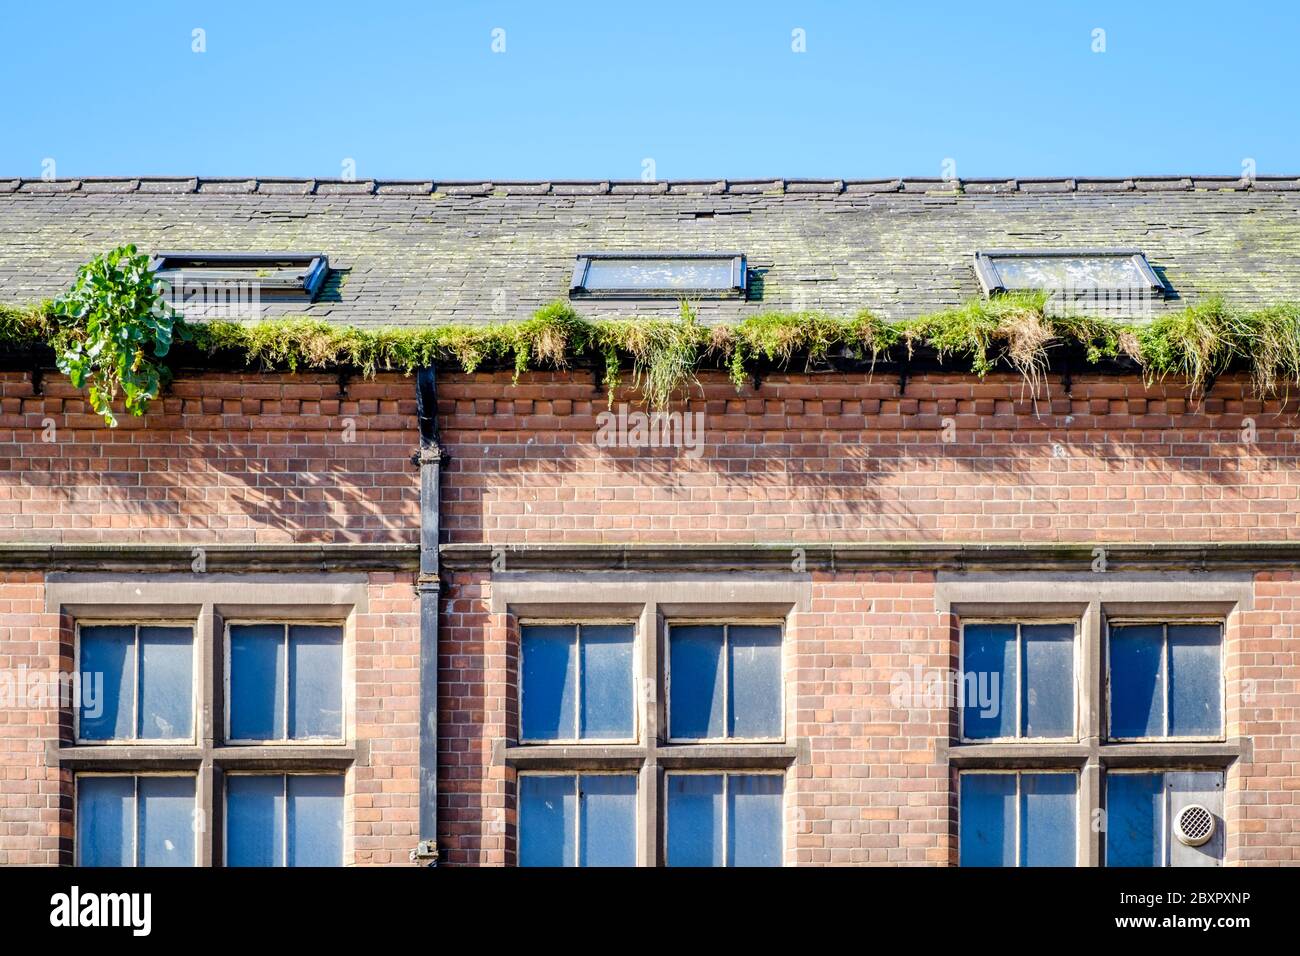 Grass and plants growing in the guttering of the roof of a building, Nottingham, England, UK Stock Photo